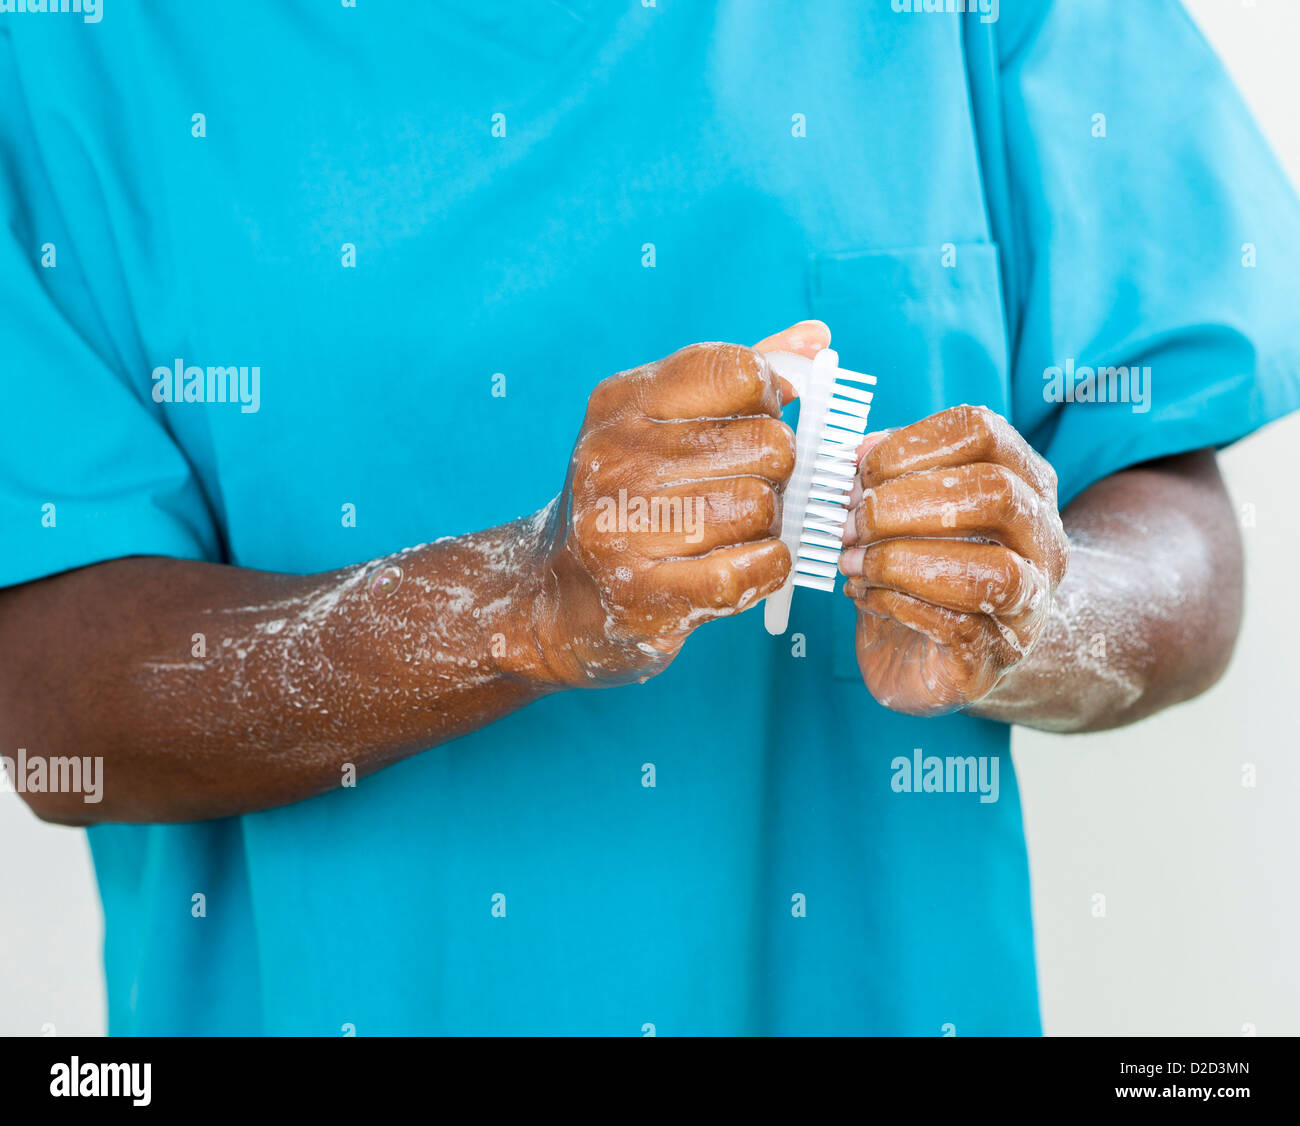 MODEL RELEASED Scrubbing up before surgery Stock Photo